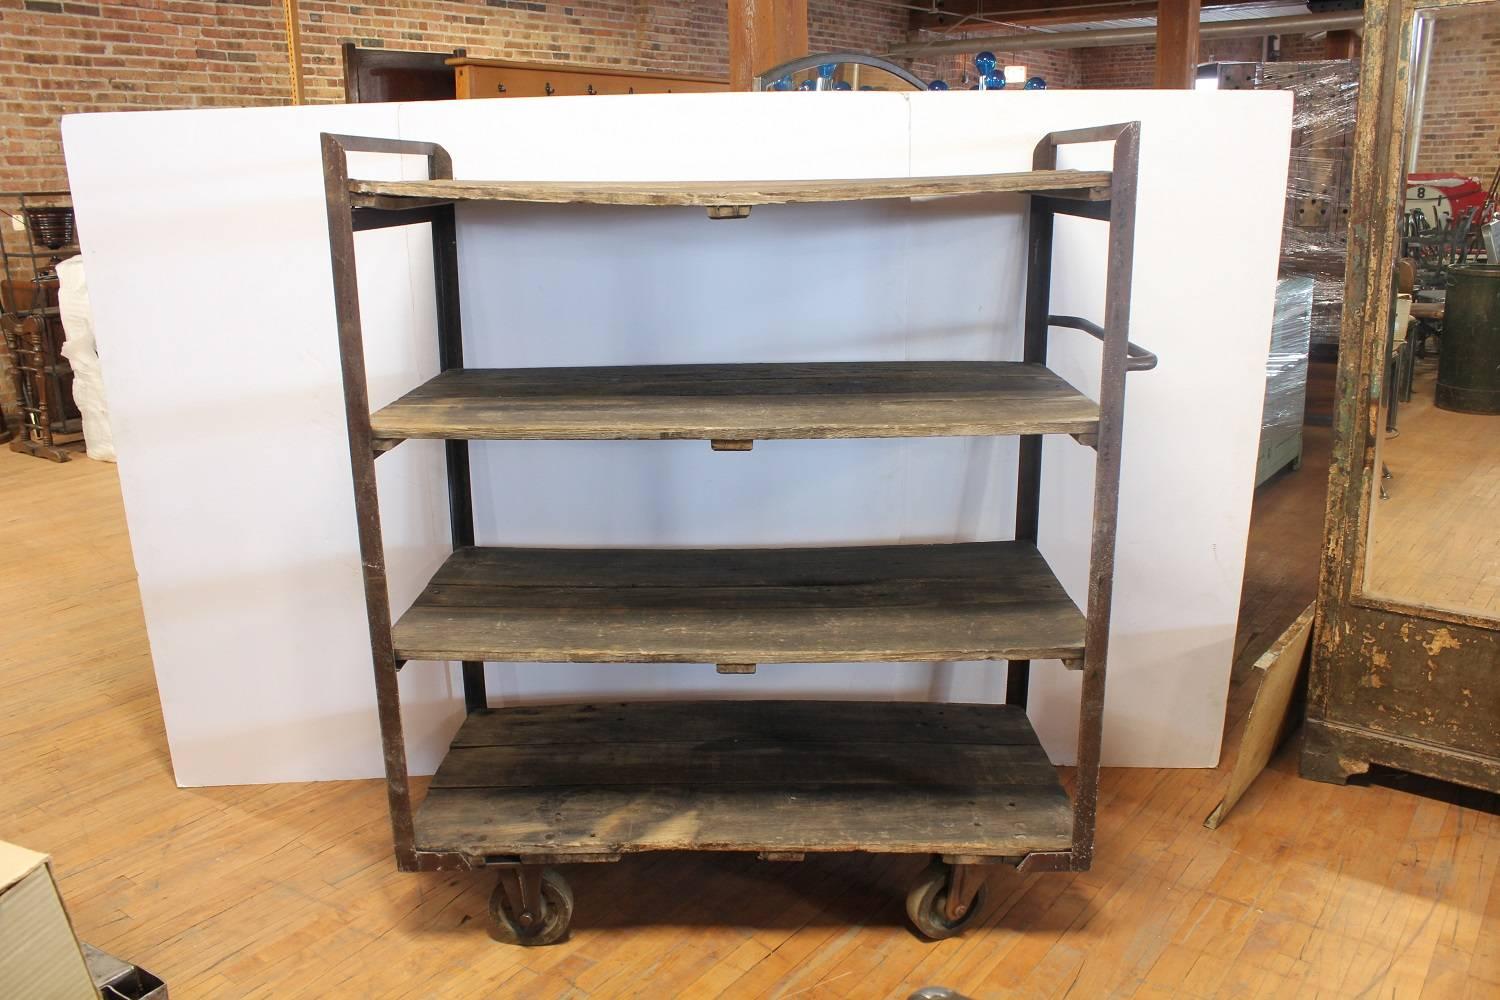 Antique Industrial shelves with metal base and wood shelves.